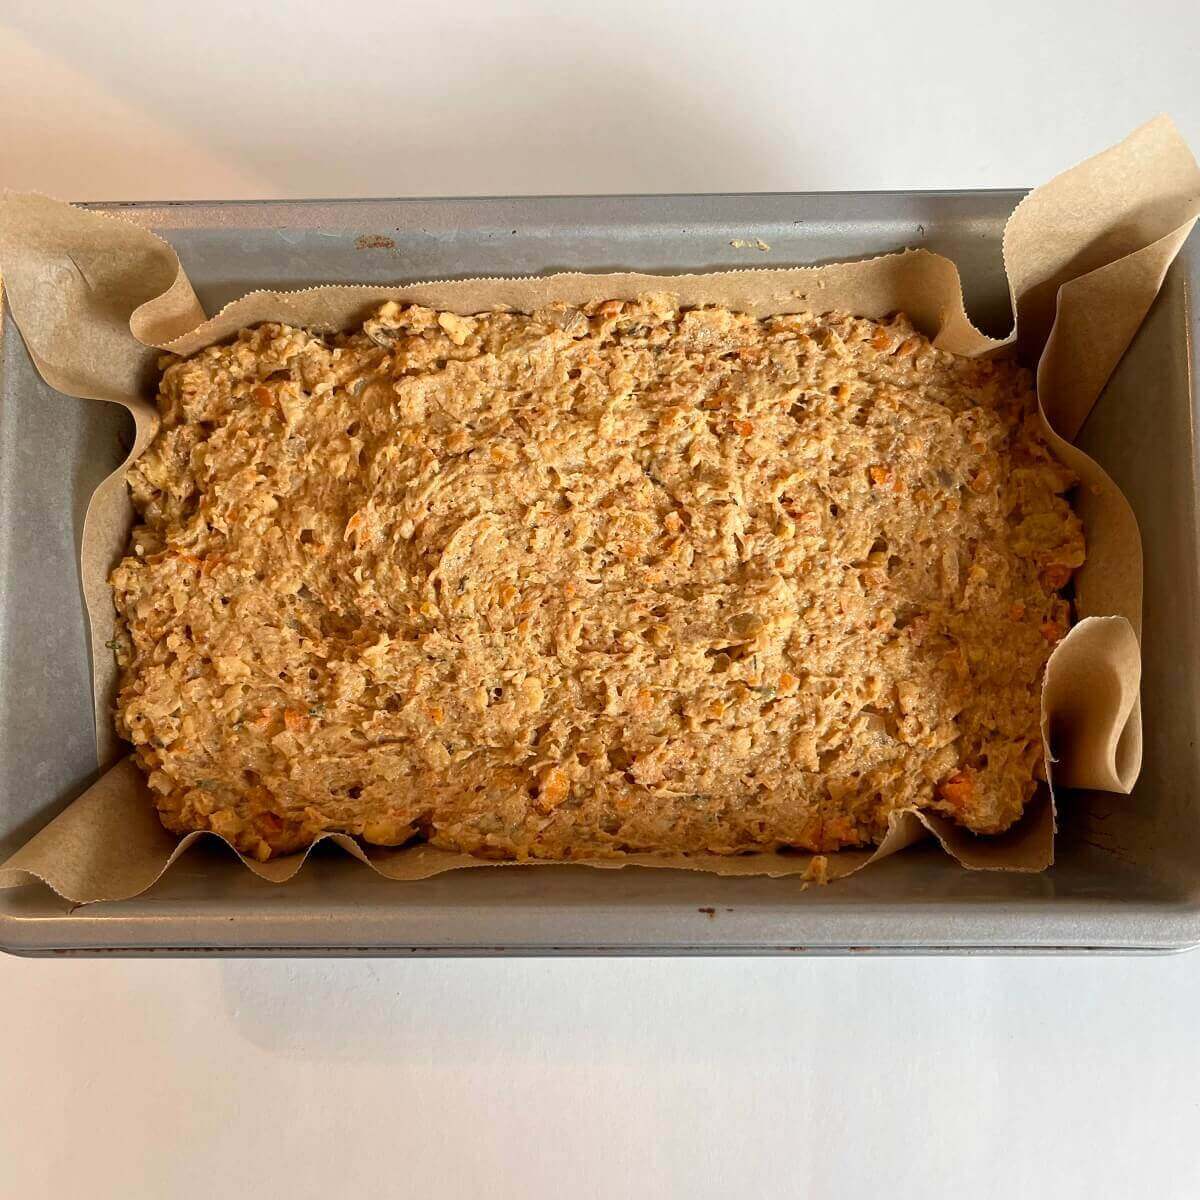 Raw vegetarian meatloaf in a metal pan lined with parchment paper.